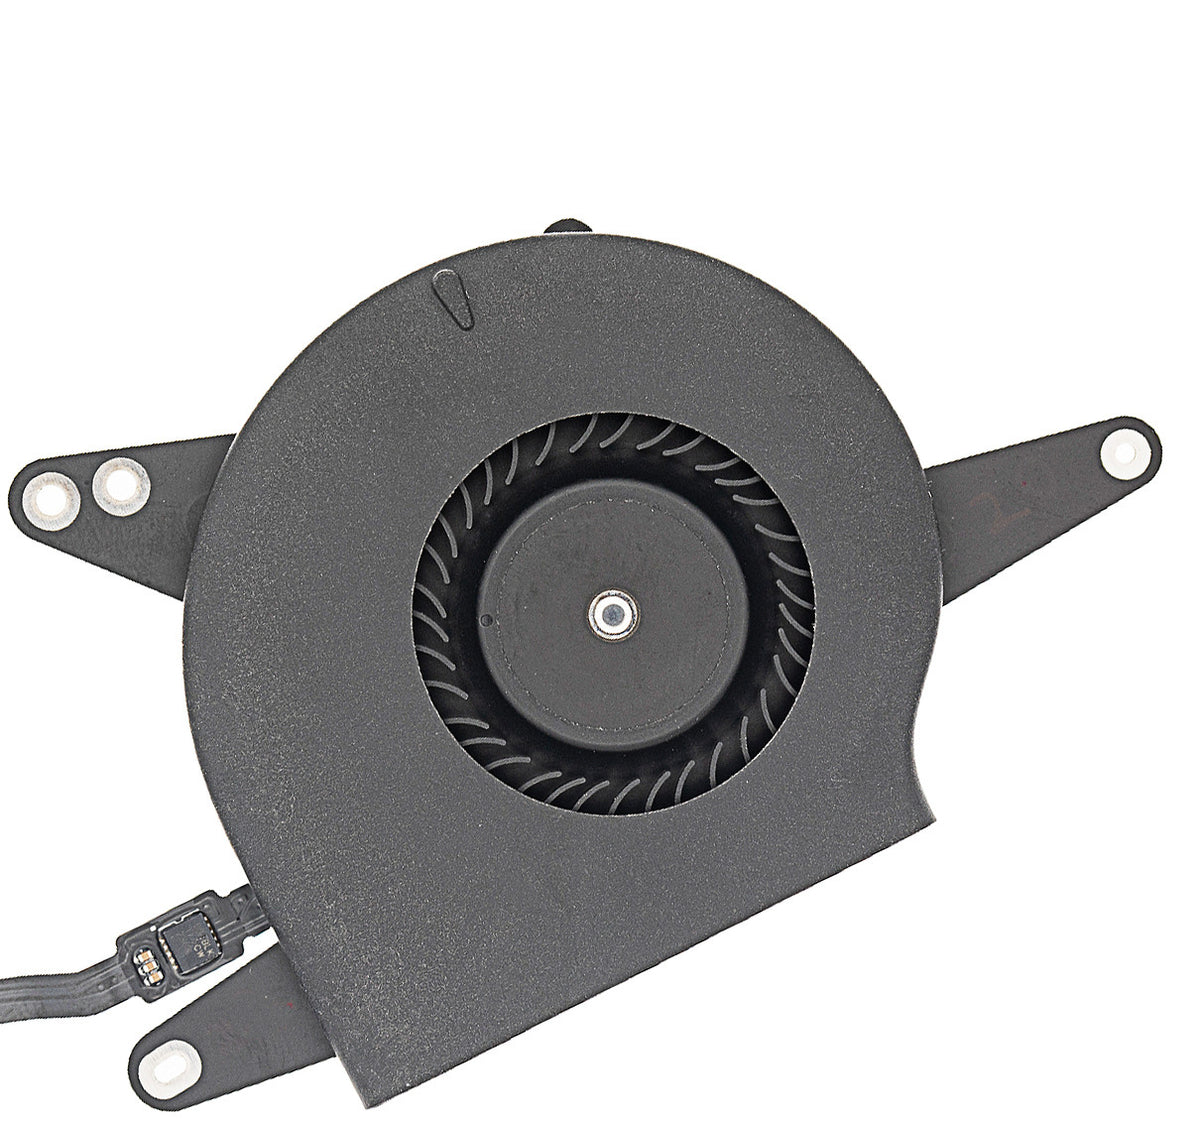 CPU FAN FOR MACBOOK AIR 13" RETINA (A1932: LATE 2018 / EARLY 2019 / MID 2019 / A2179: EARLY 2020 / A2337 / LATE 2020)